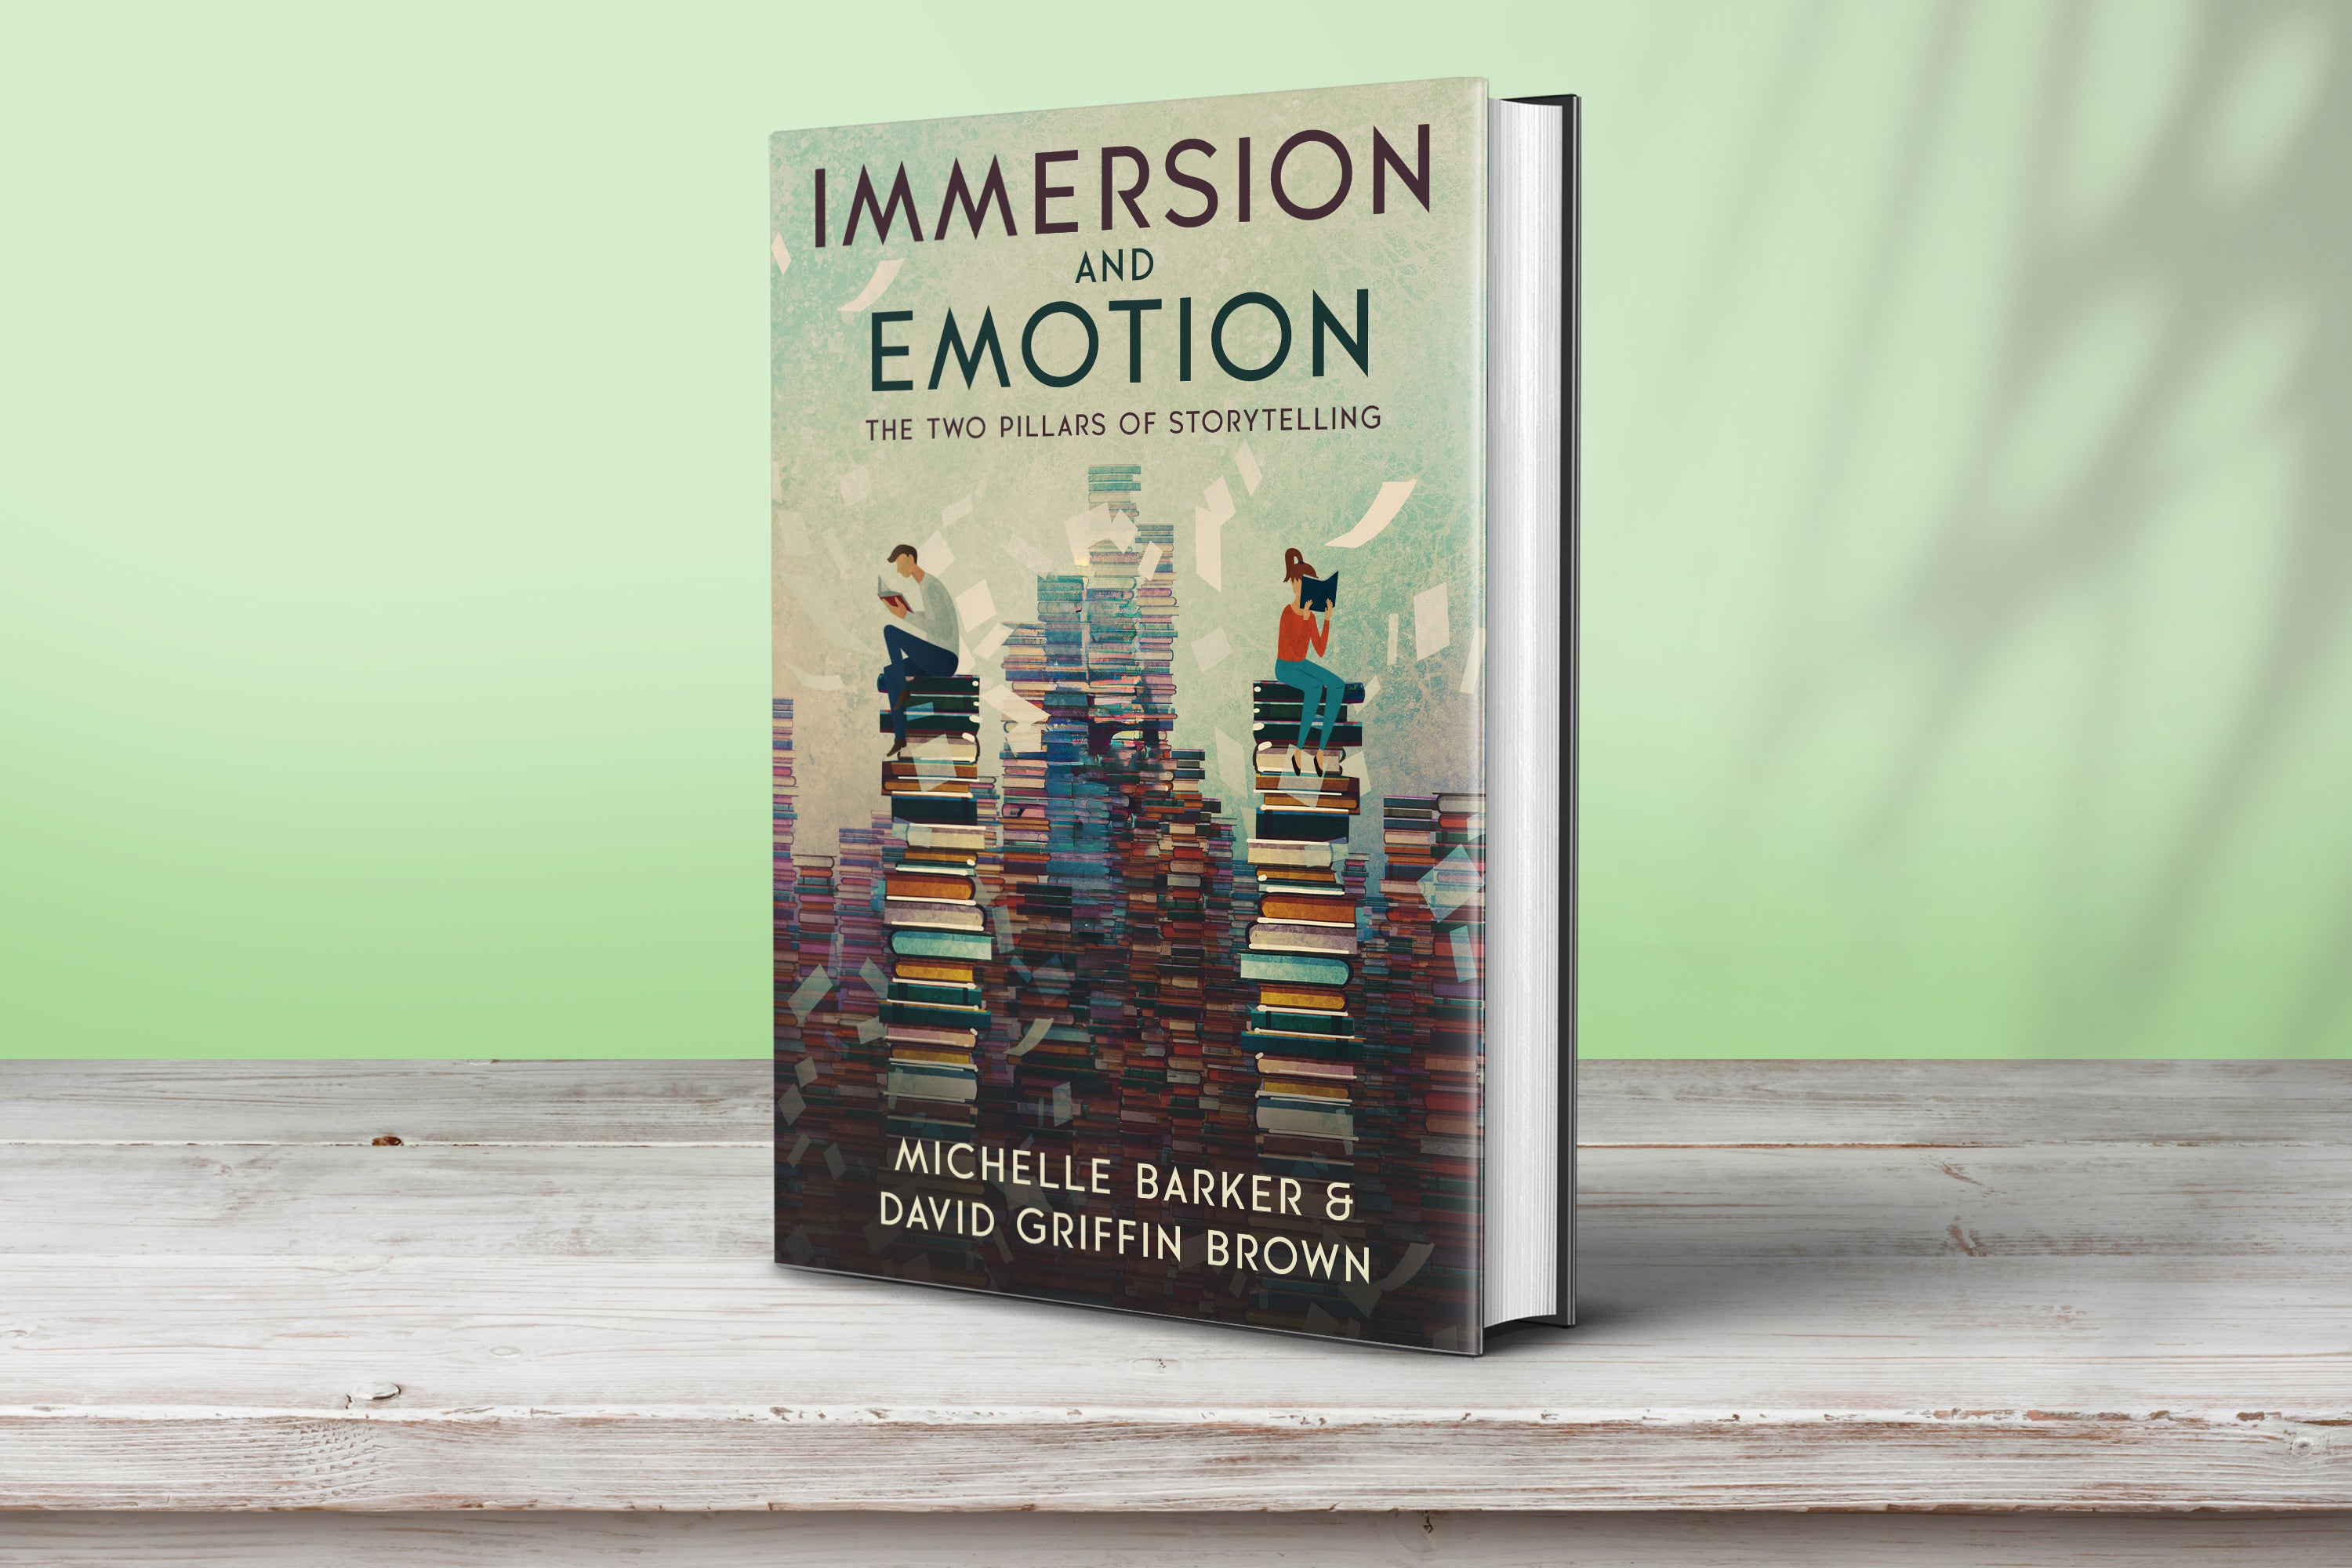 Book reviews for Immersion and Emotion: The Two Pillars of Storytelling